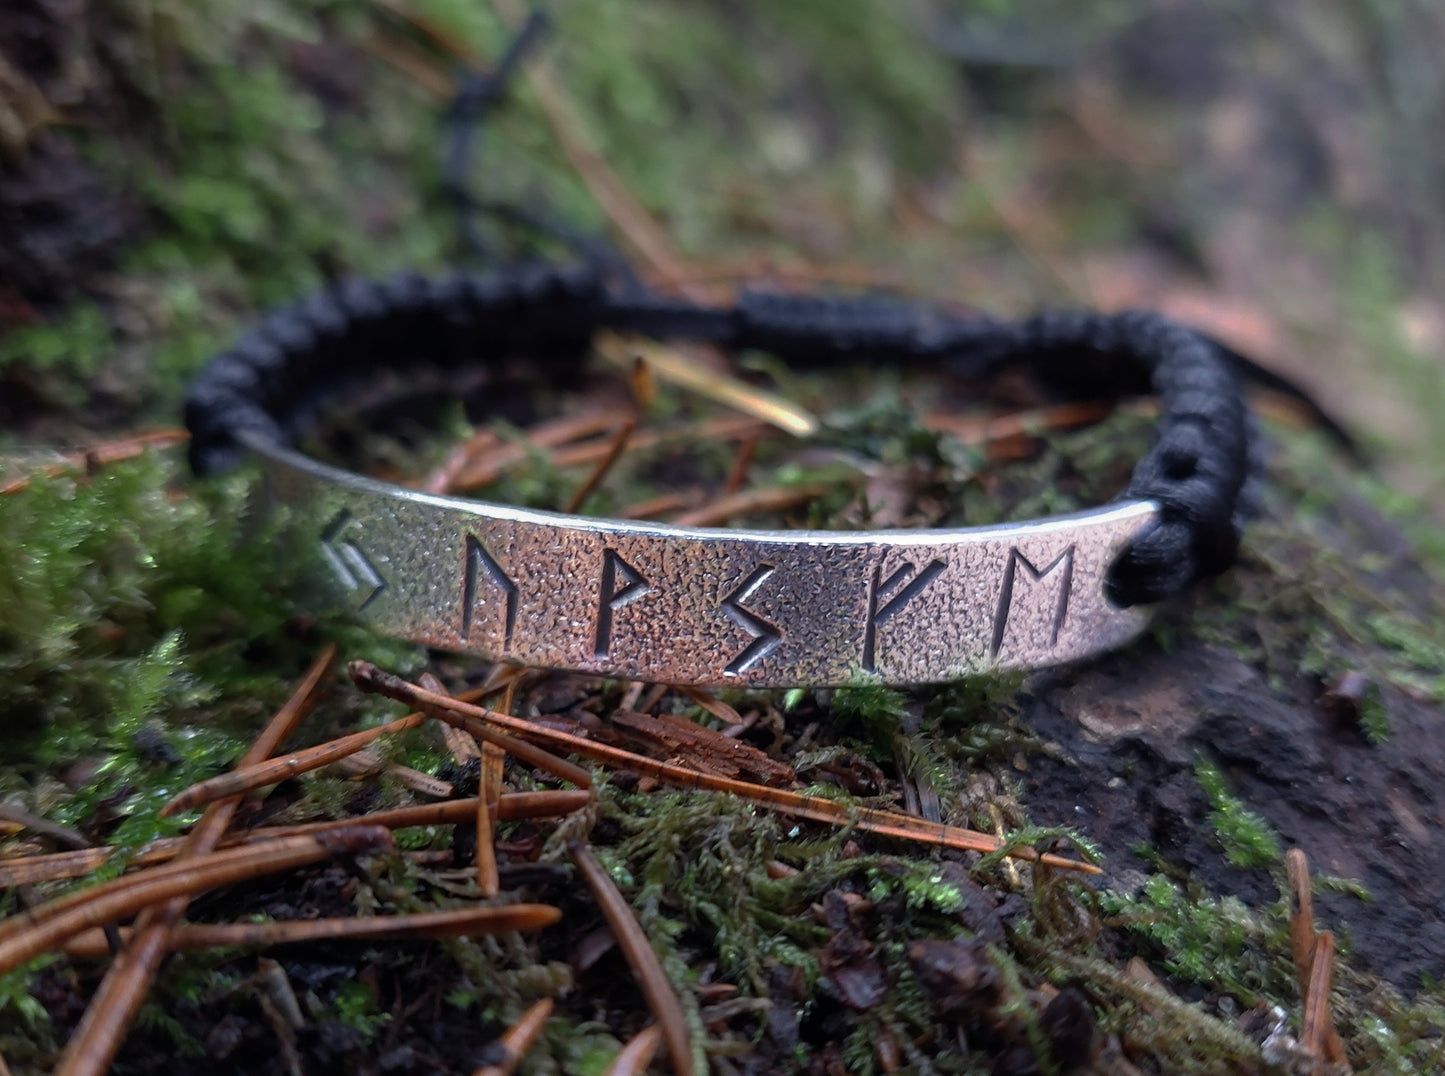 Enchanted sterling Silver Viking wealth, money and prosperity amulet bracelet. Real amulet charm with celtic wealth runes formula